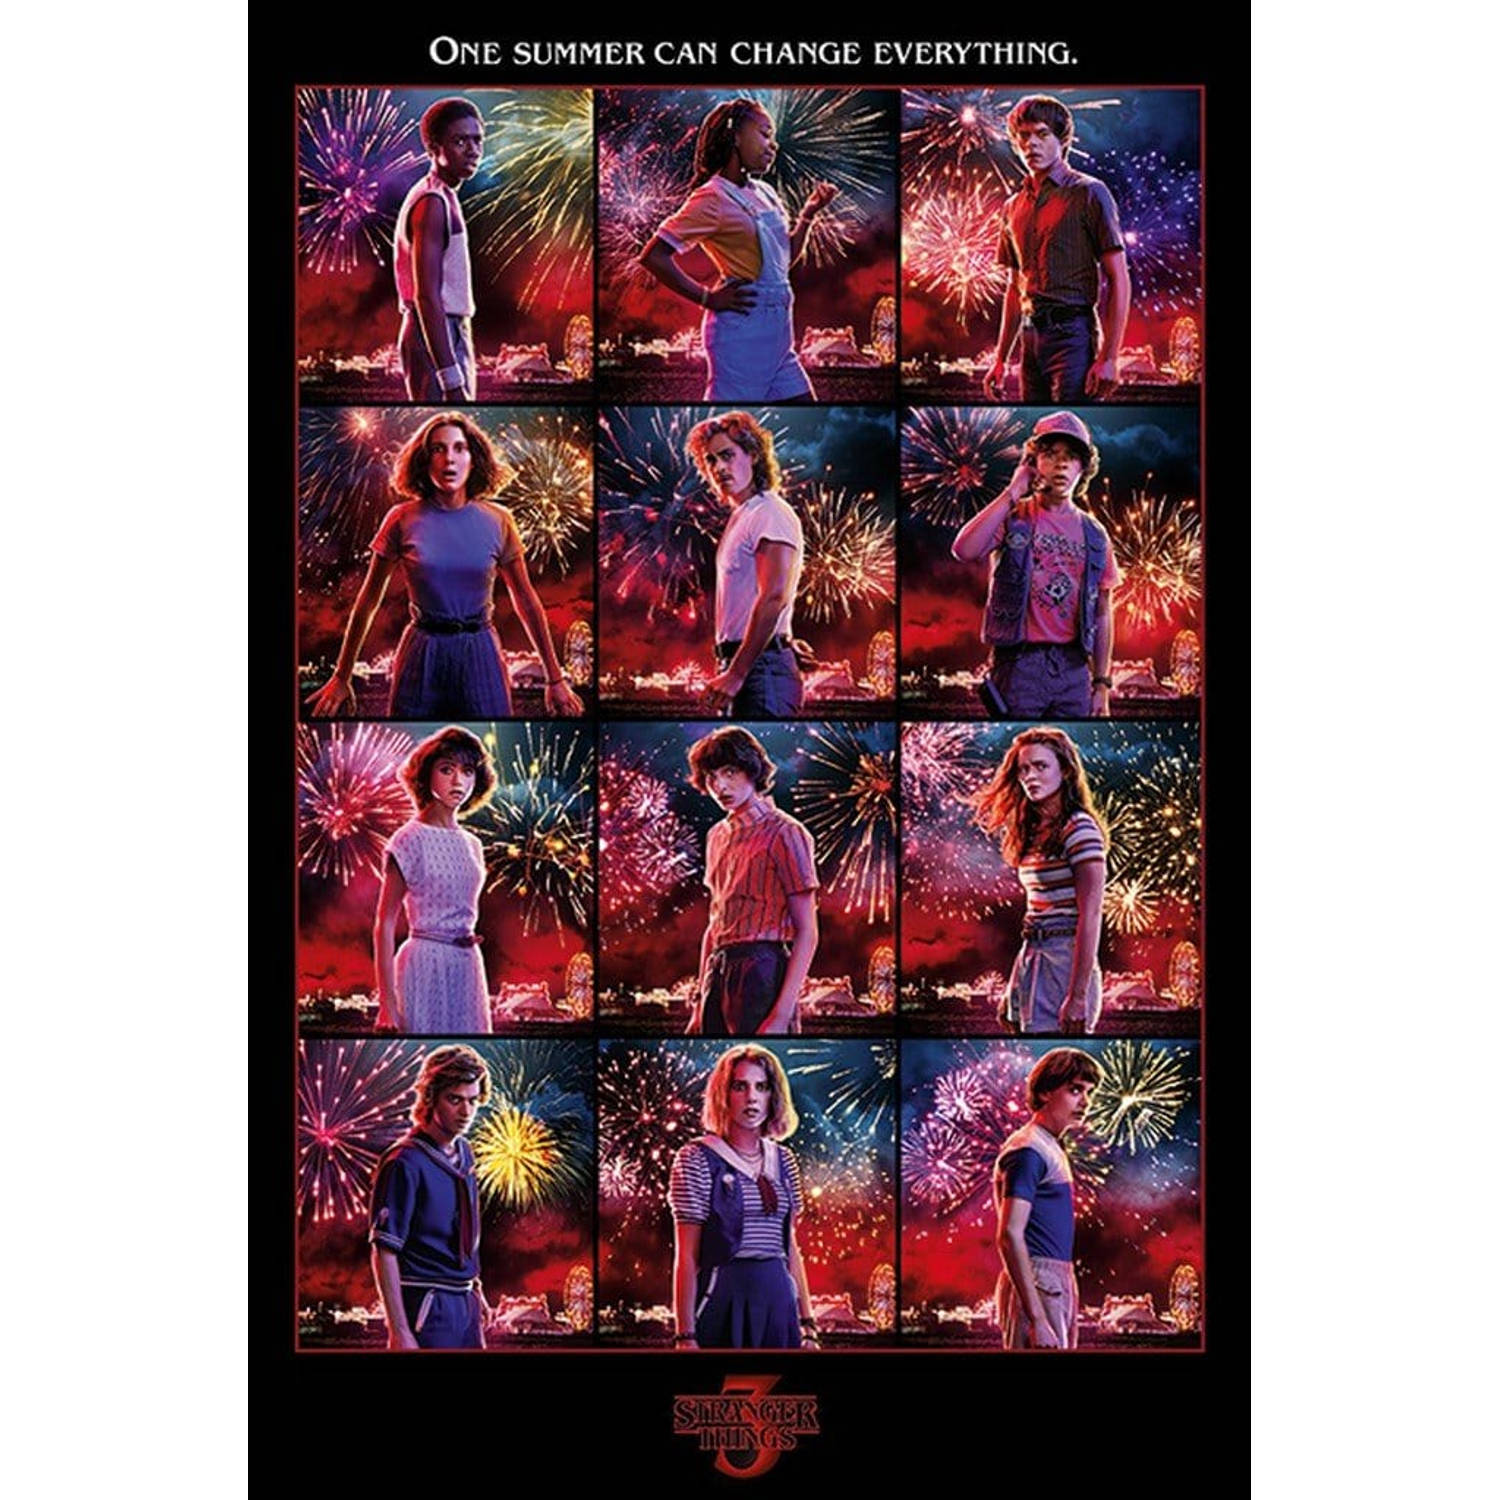 Stranger Things Character Montage Poster 61x91.5cm